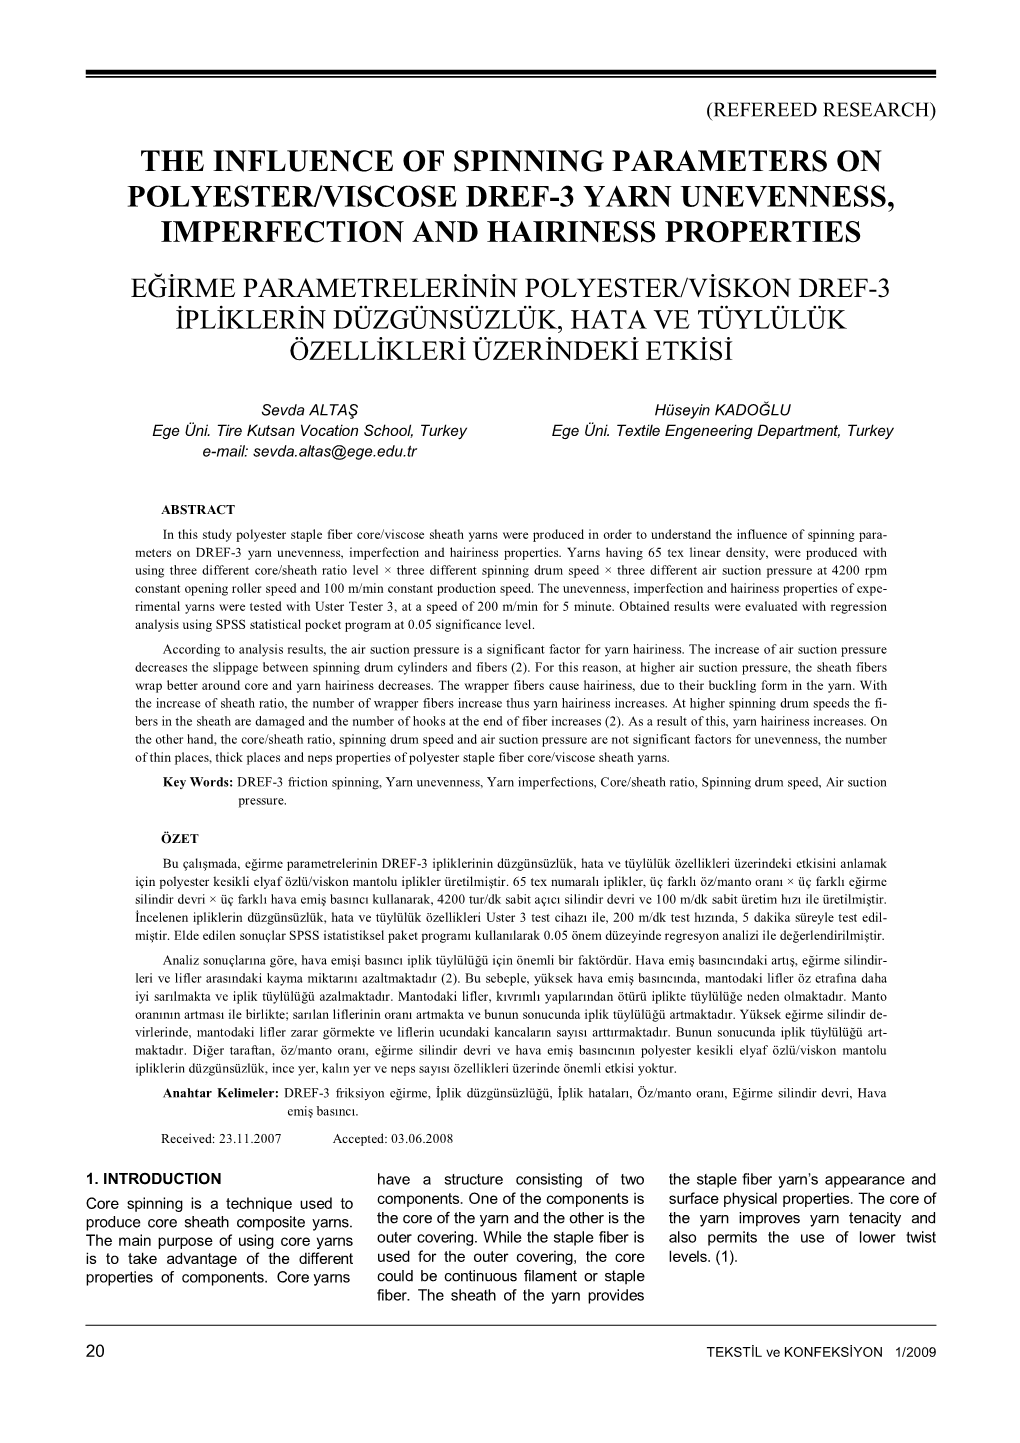 The Influence of Spinning Parameters on Polyester/Viscose Dref-3 Yarn Unevenness, Imperfection and Hairiness Properties